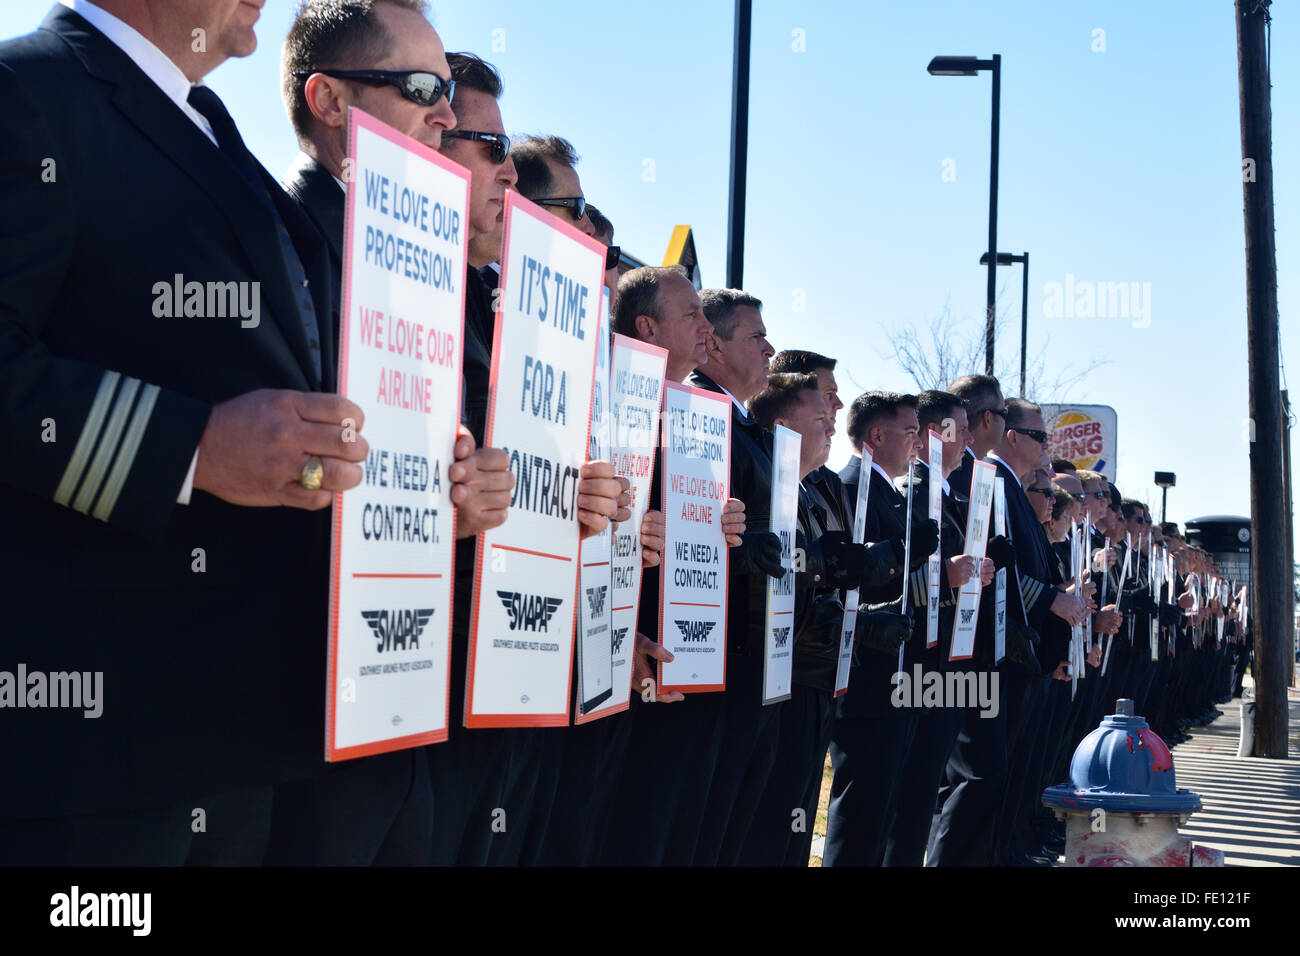 About 100 Southwest Airlines pilots silently protest in support for a contract outside of Love Field Credit:  Brian T. Humek/Alamy Live News Stock Photo